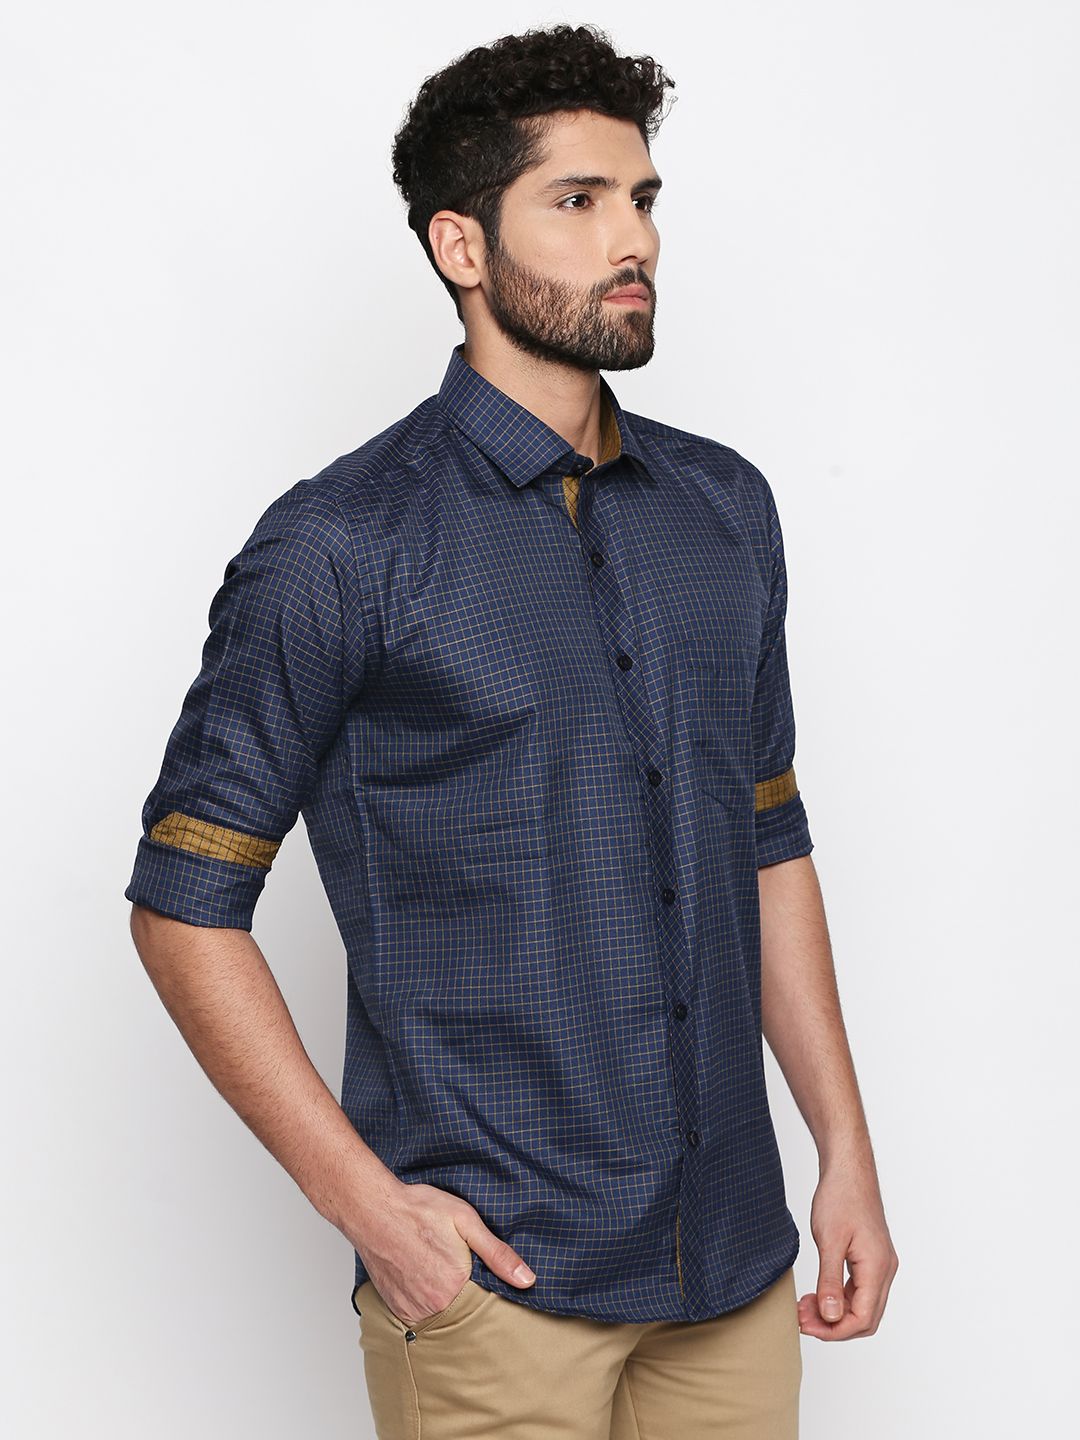 Buy Solemio Poly Cotton Shirt For Mens Online @ ₹648 from ShopClues